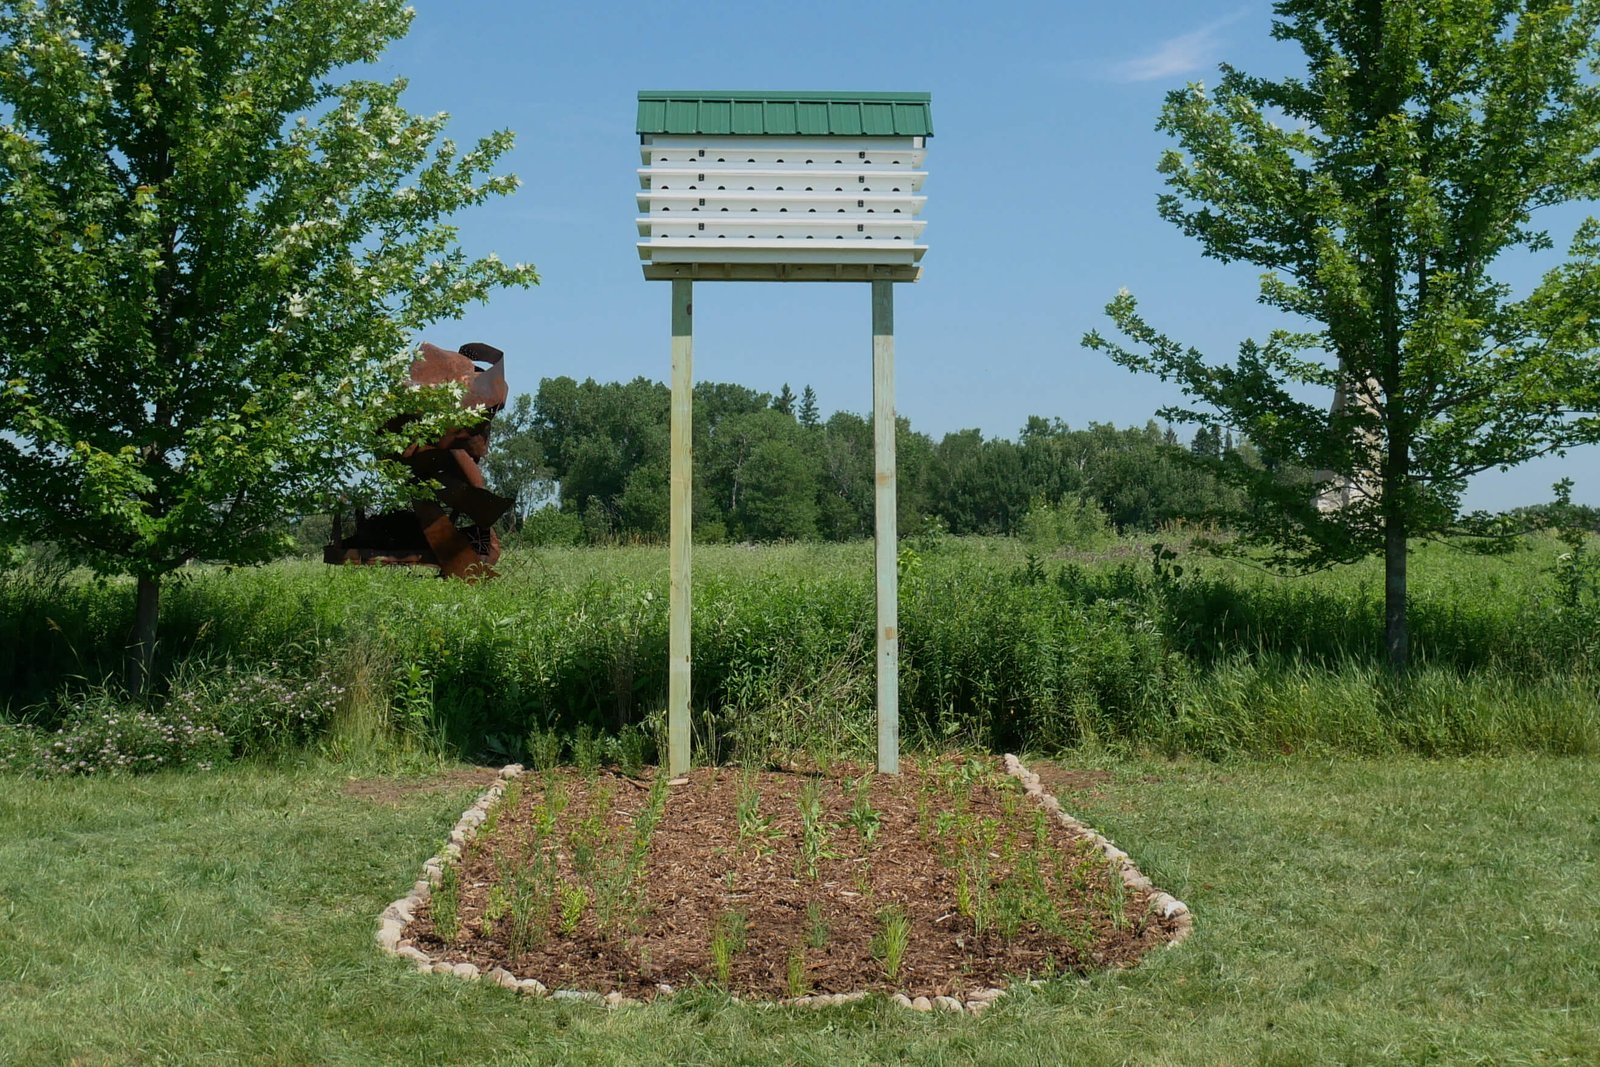 A praire garden in the shape of a basketball free throw lane and a purple martin house